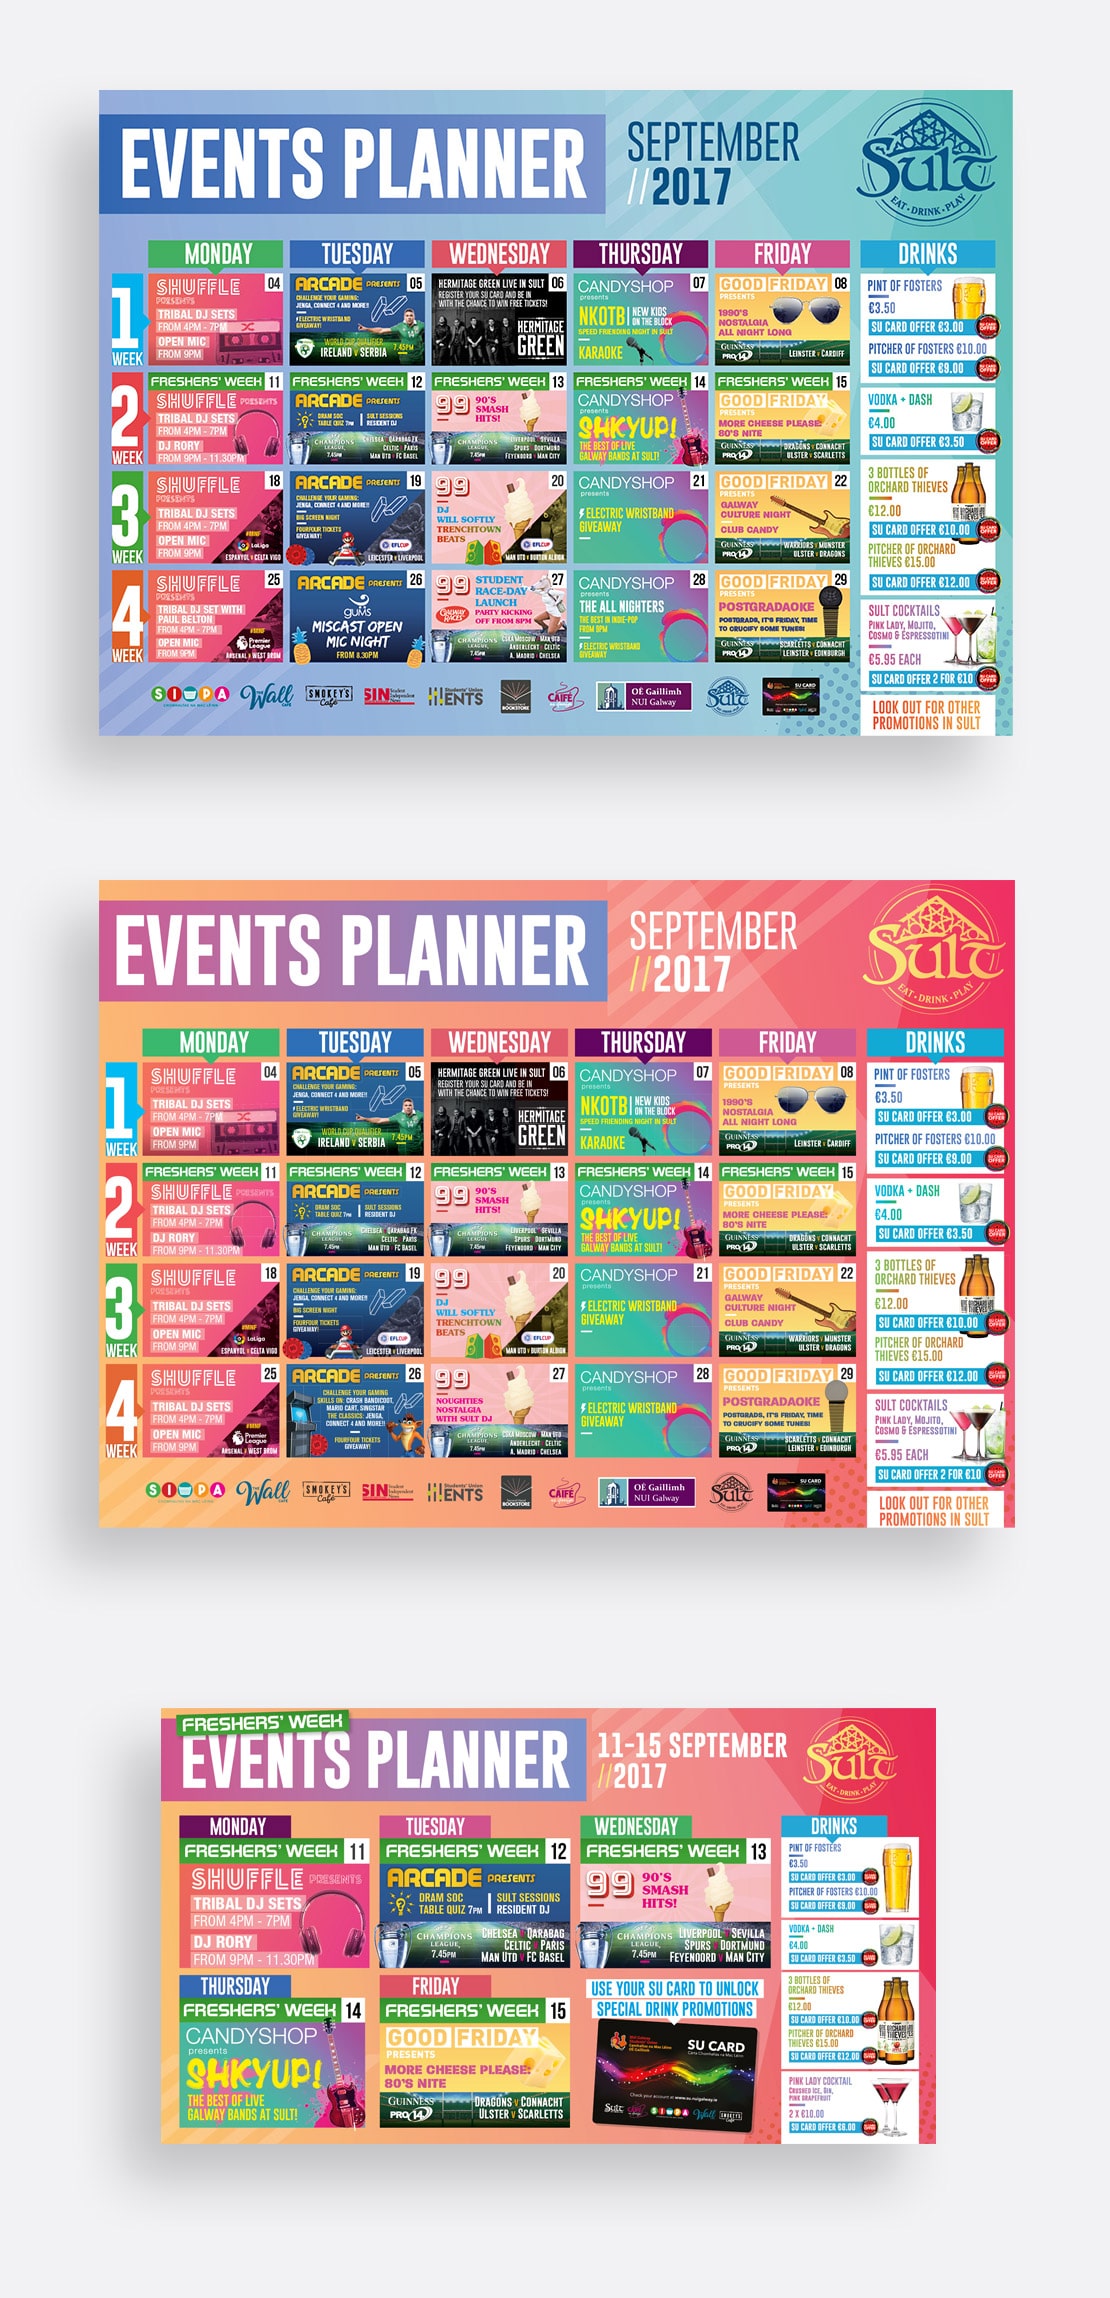 Large format events planner in print and digital formats for Sult Bar, NUIG